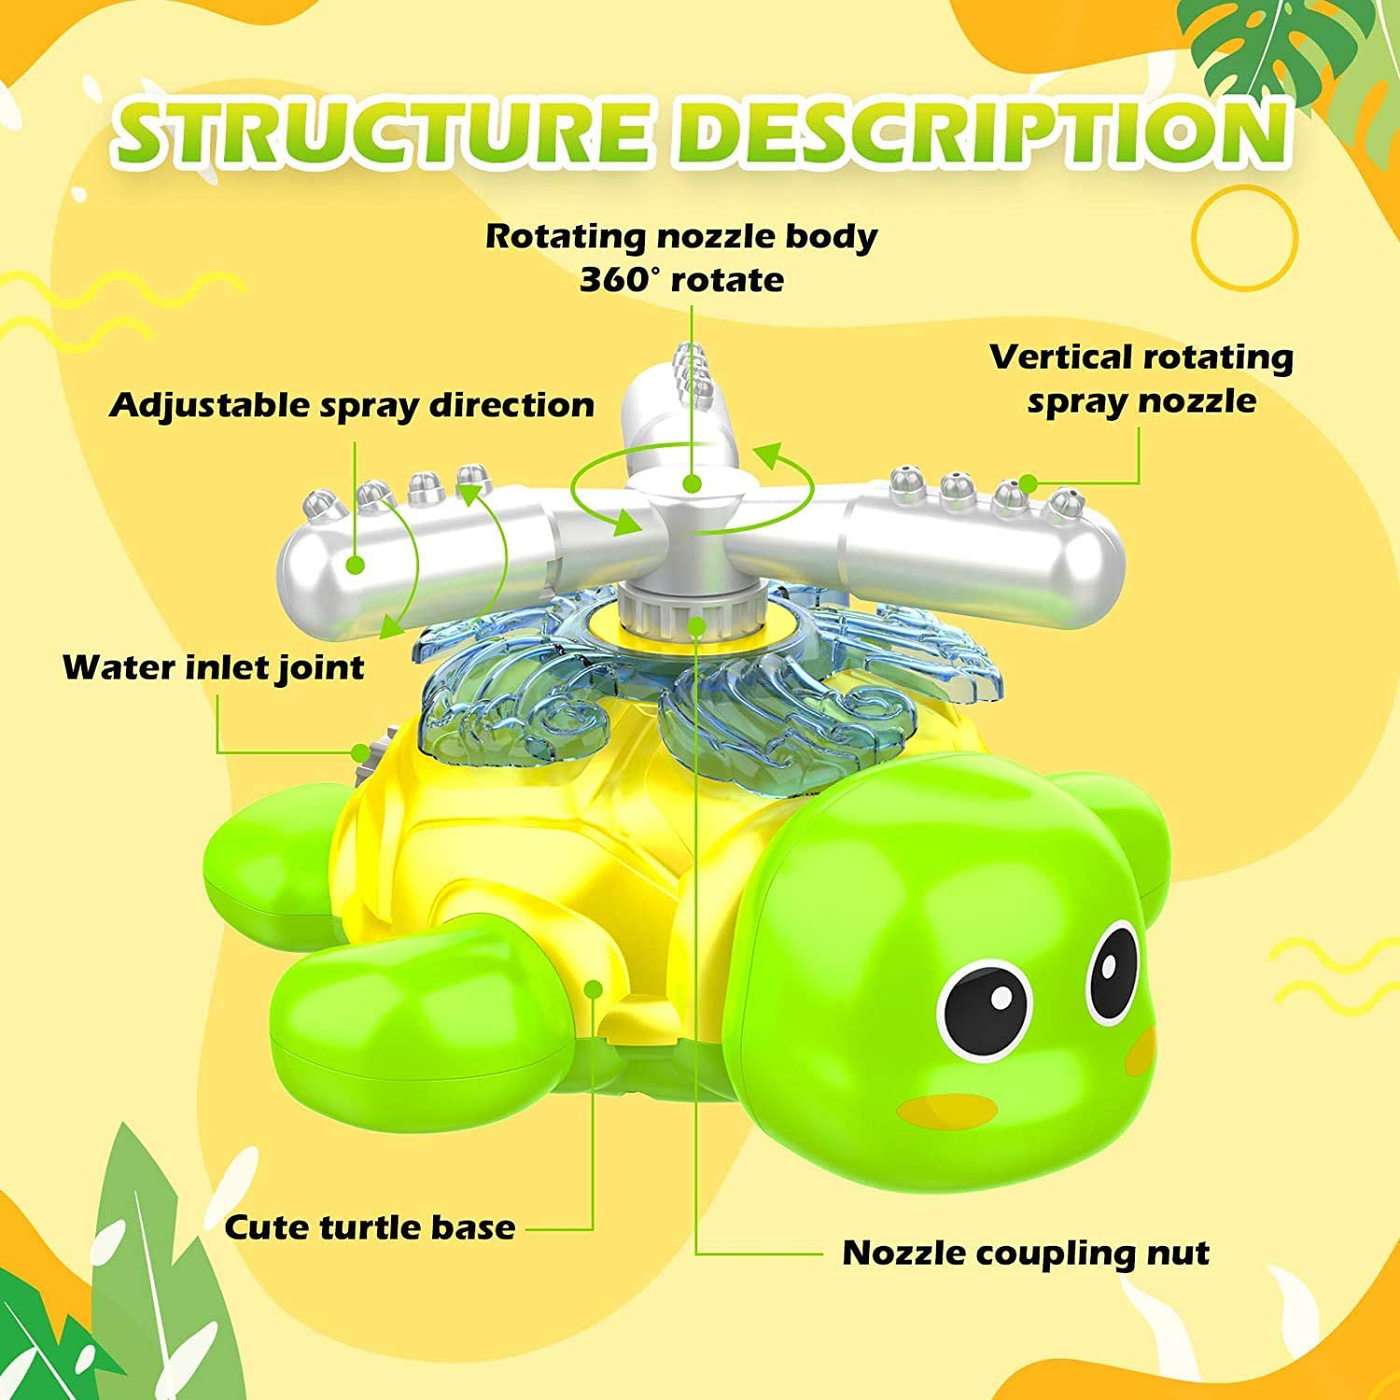 KMUYSL Spray Sprinkler for Kids, Outdoor Water Toys Gifts for 3,4,5,6,7,8 Year Old Boys & Girls Turtle Sprinkler Toy - Spinning Turtle Spray Sprinkler for Outside Lawn Backyard Yard